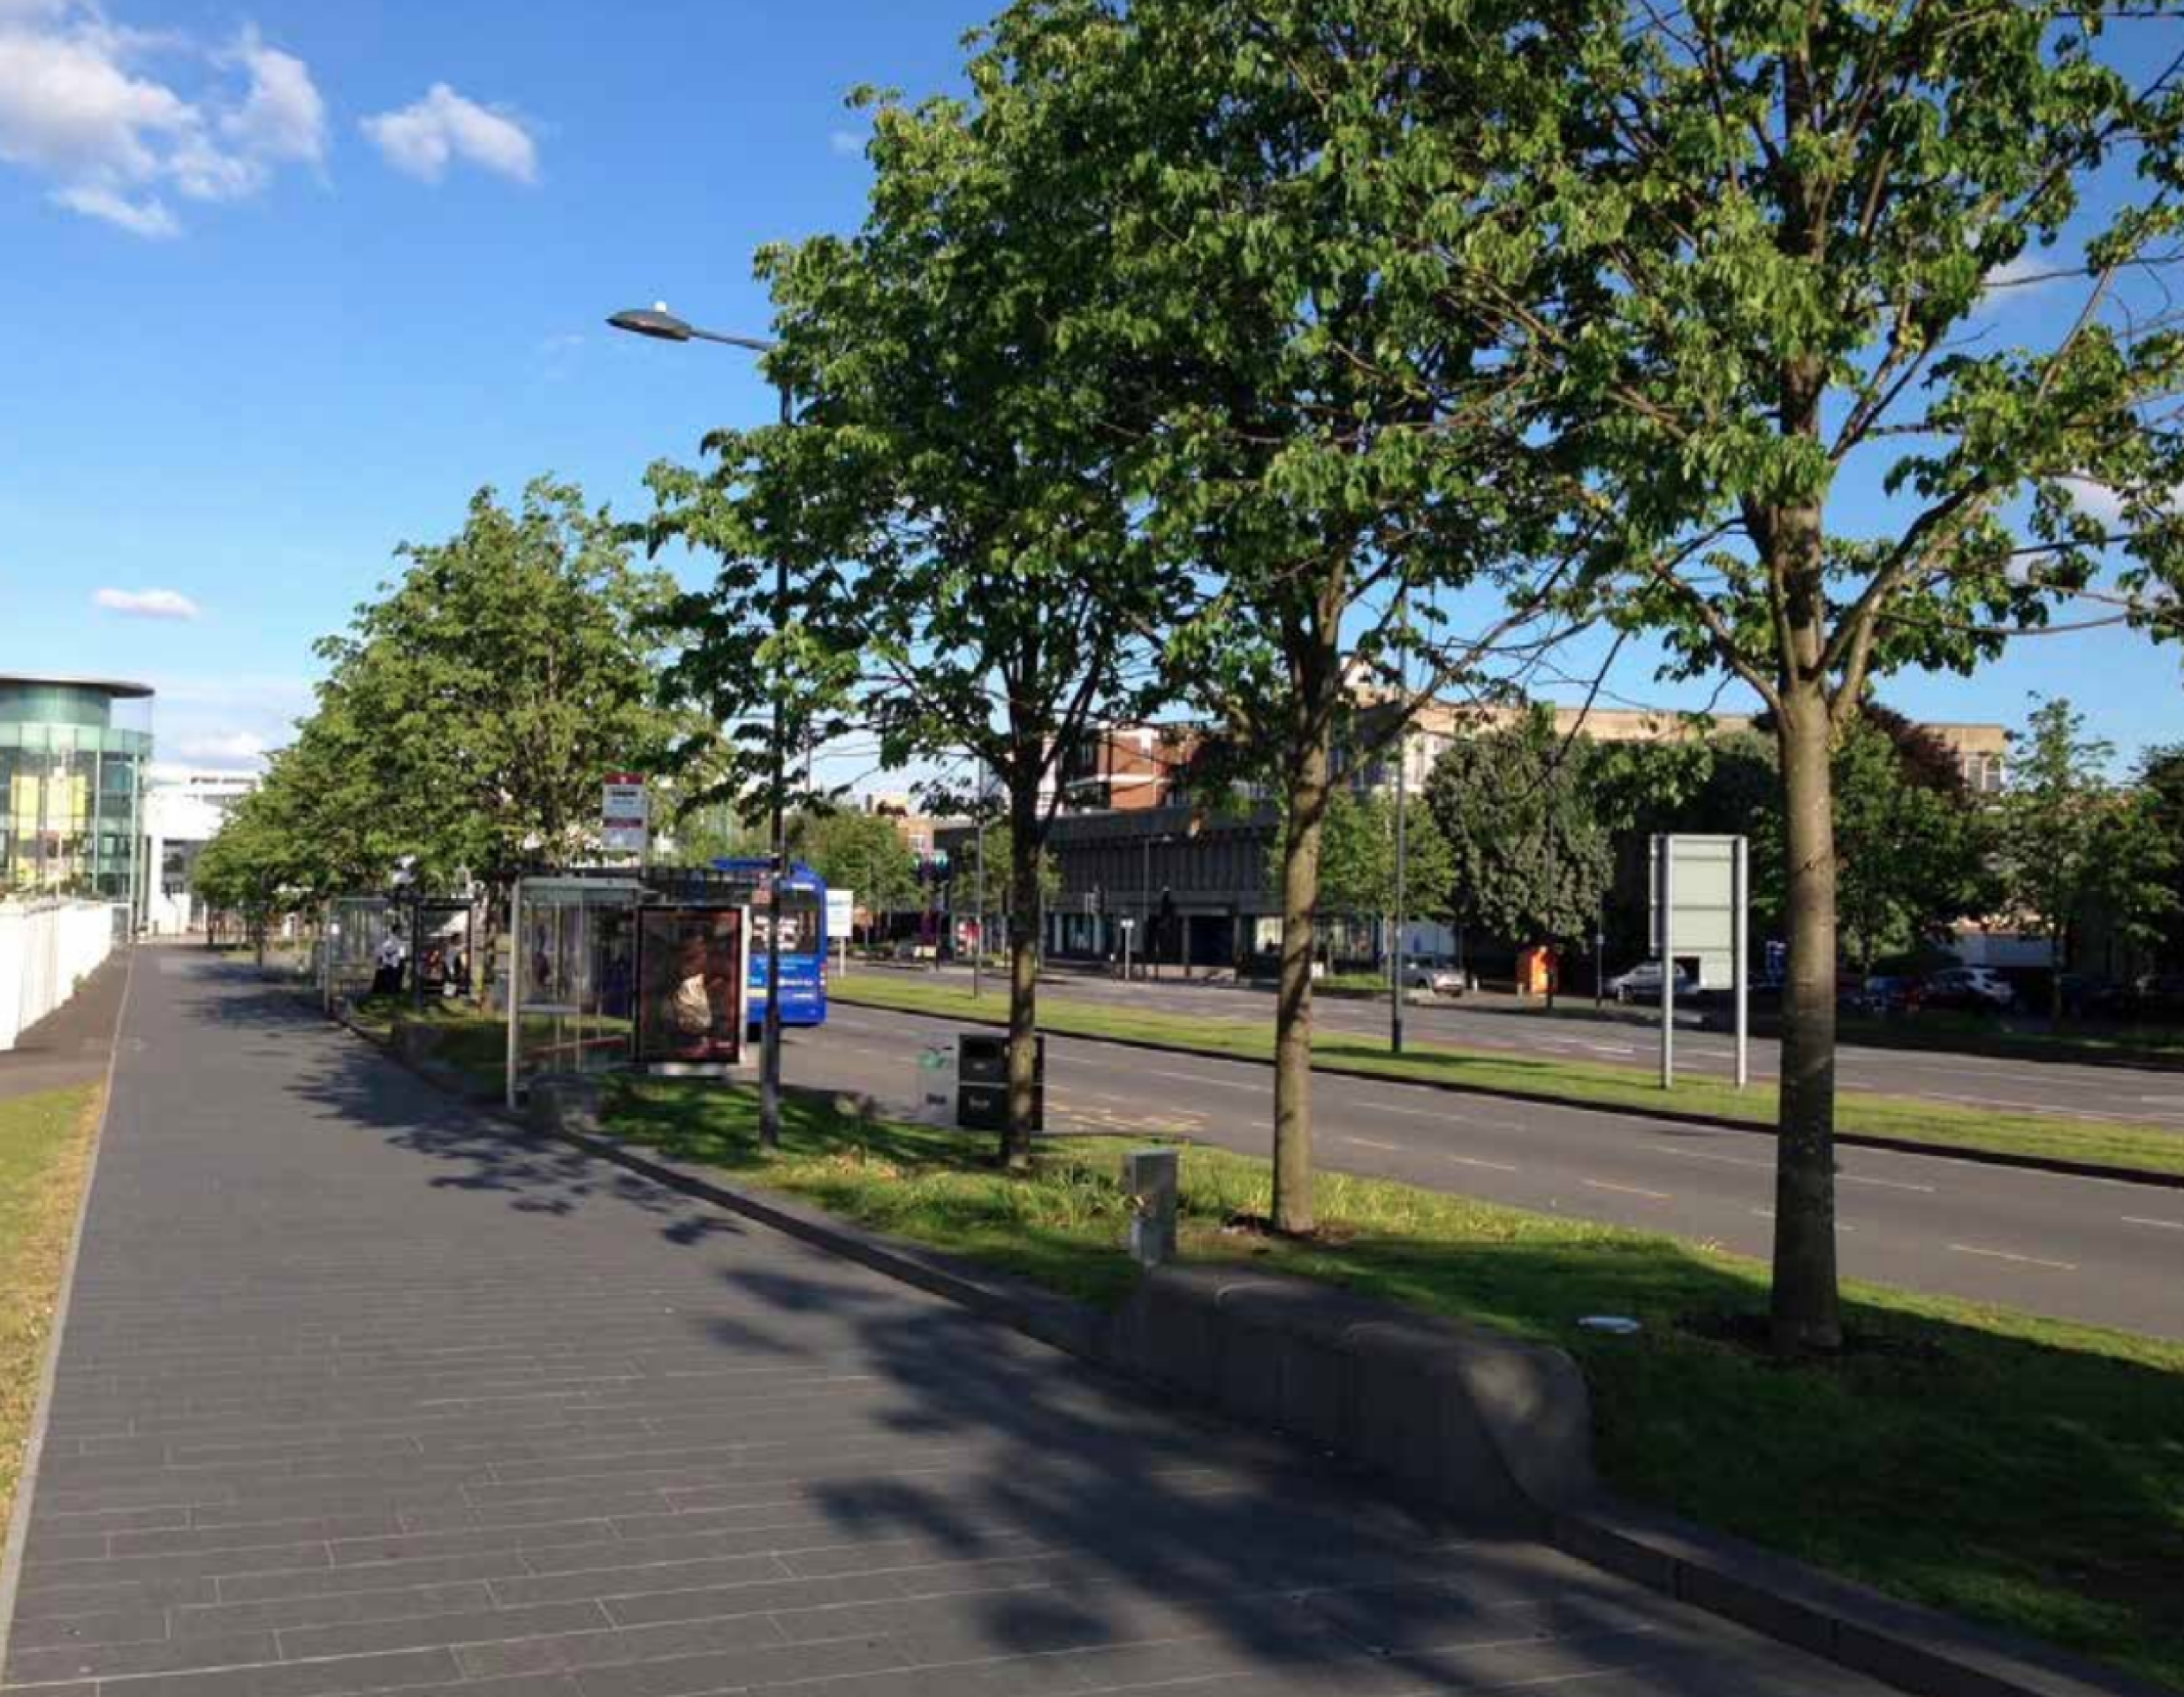 Environmental improvements to the A4 in Slough show how Greens Way could be configured